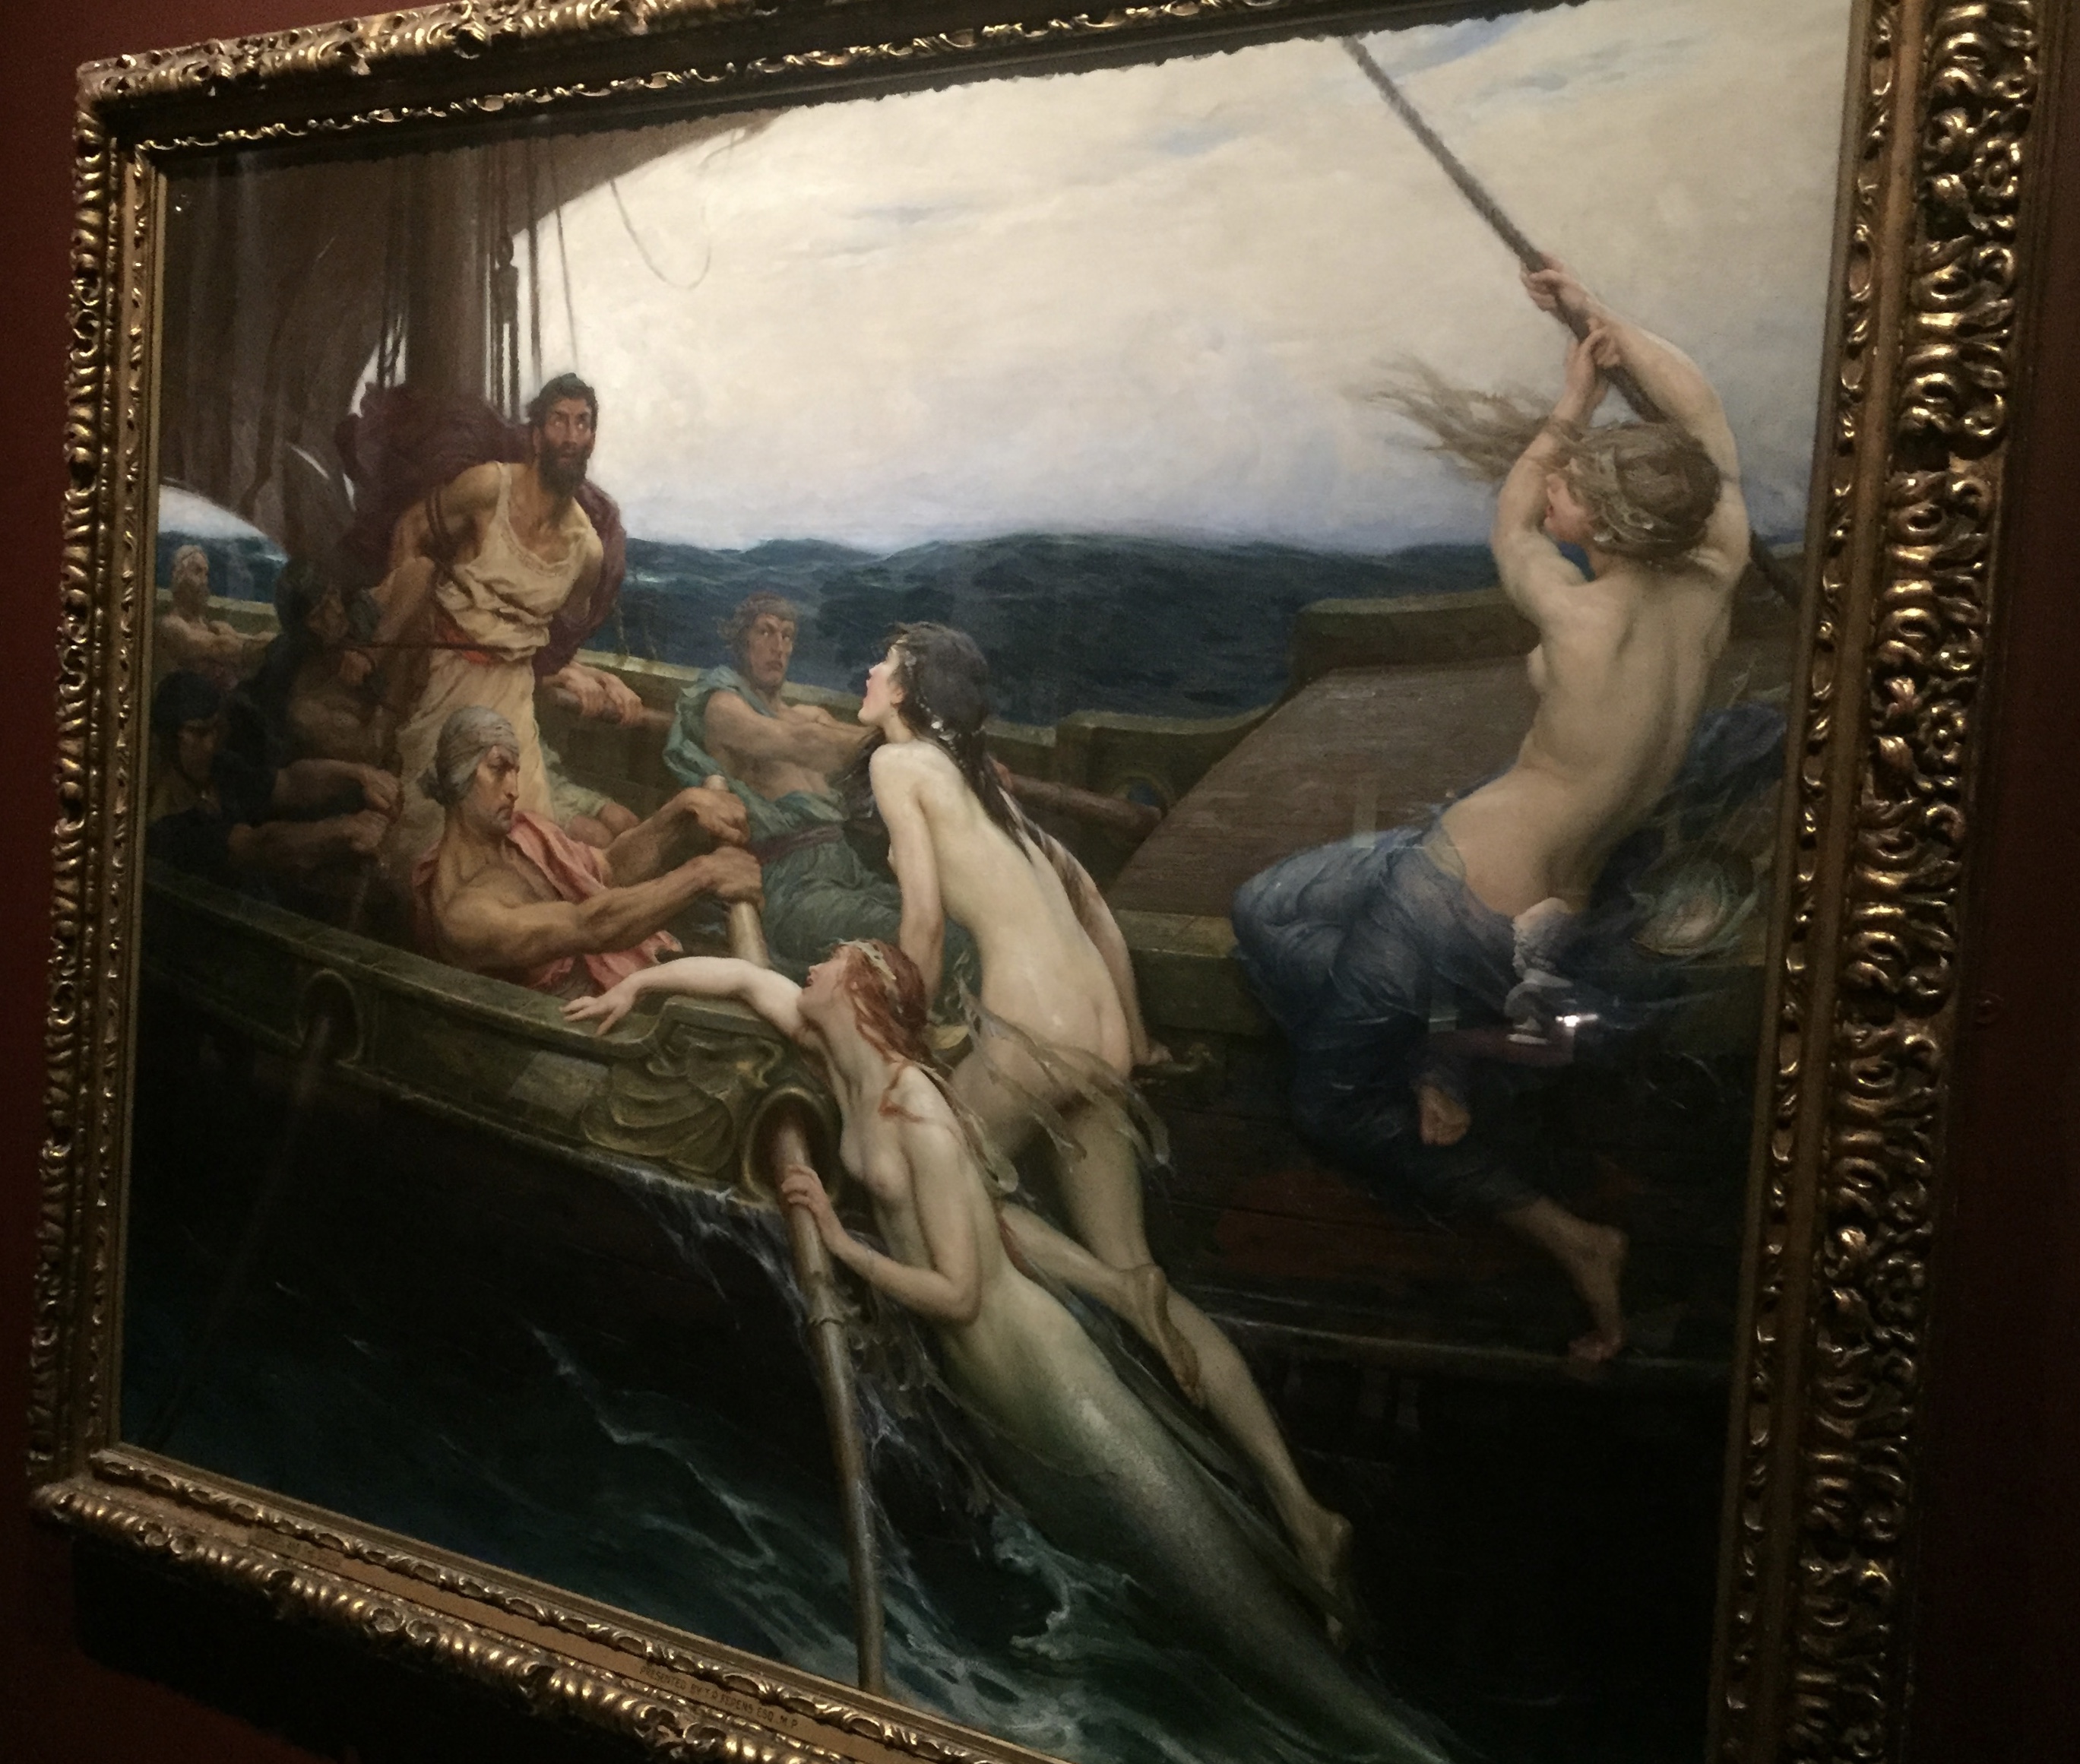 Painting entitled Ulysses and the Sirens. It shows Ulysses, a tall bearded man, tied to the mast of a ship being rowed by a group of men. His eyes are wide open, transfixed by the beauty of the three naked mermaids who are trying to climb on to the boat to reach him.